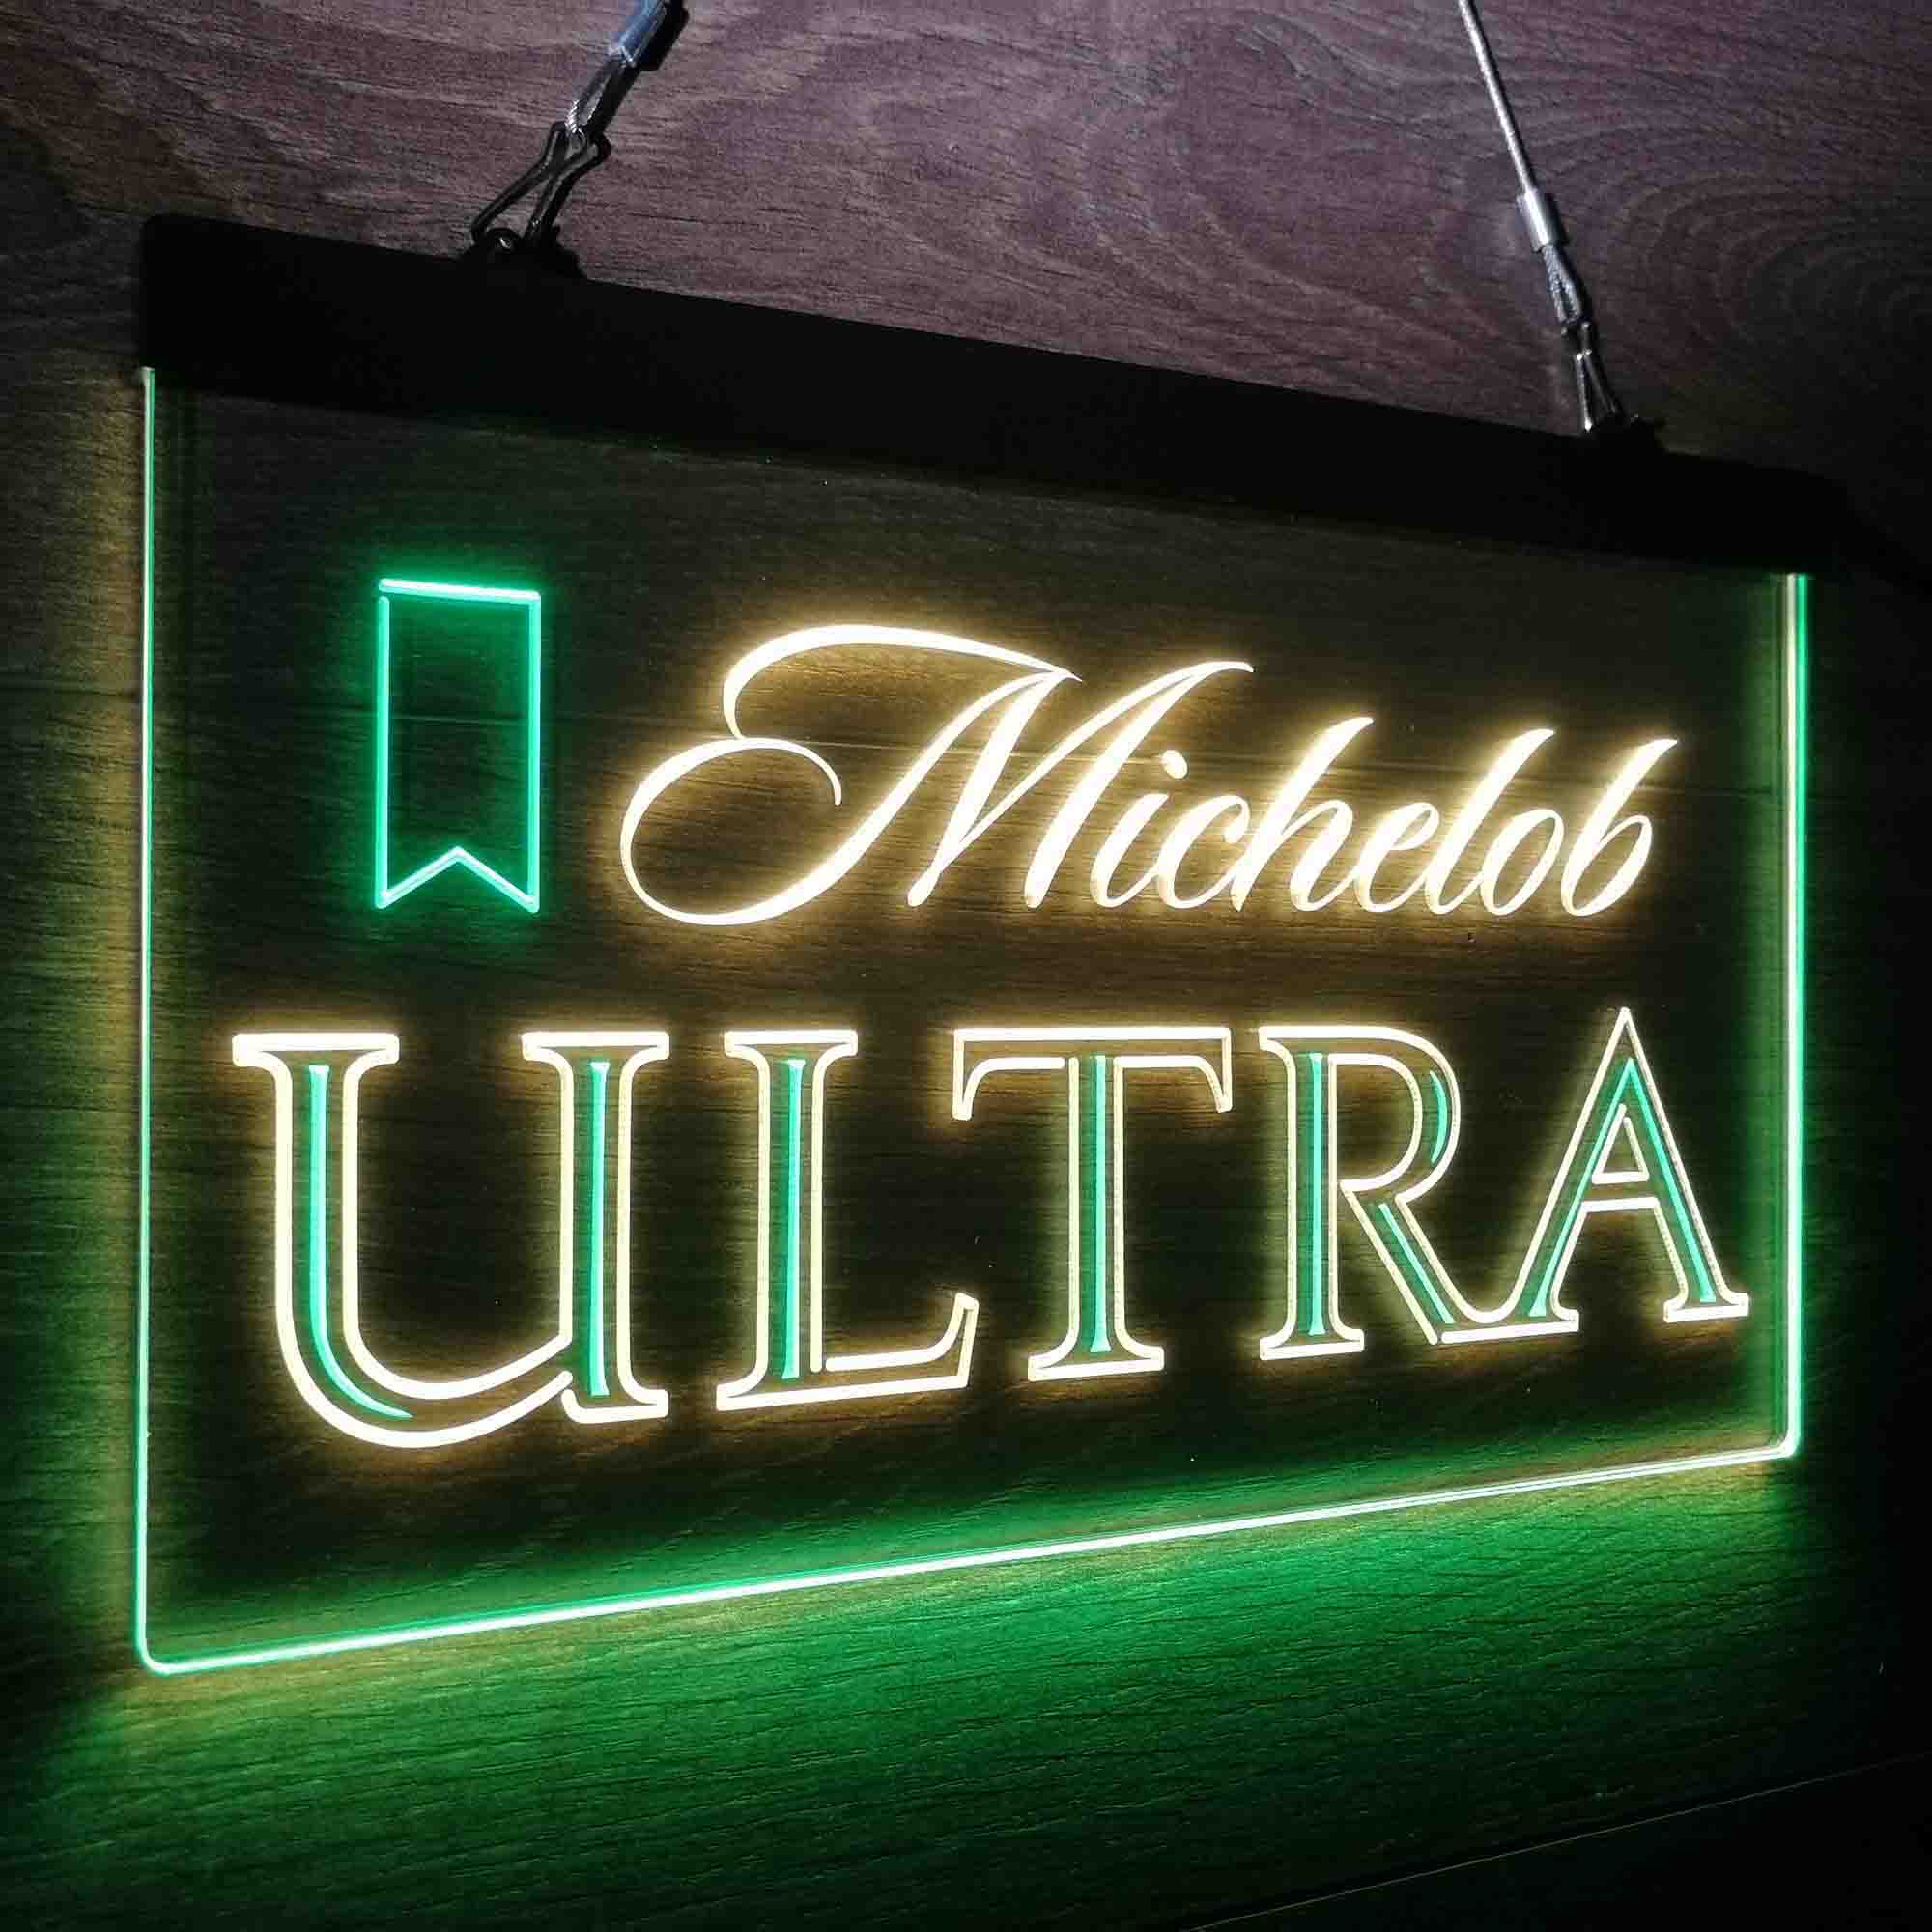 Michelobs Ultra Beer LED Neon Sign